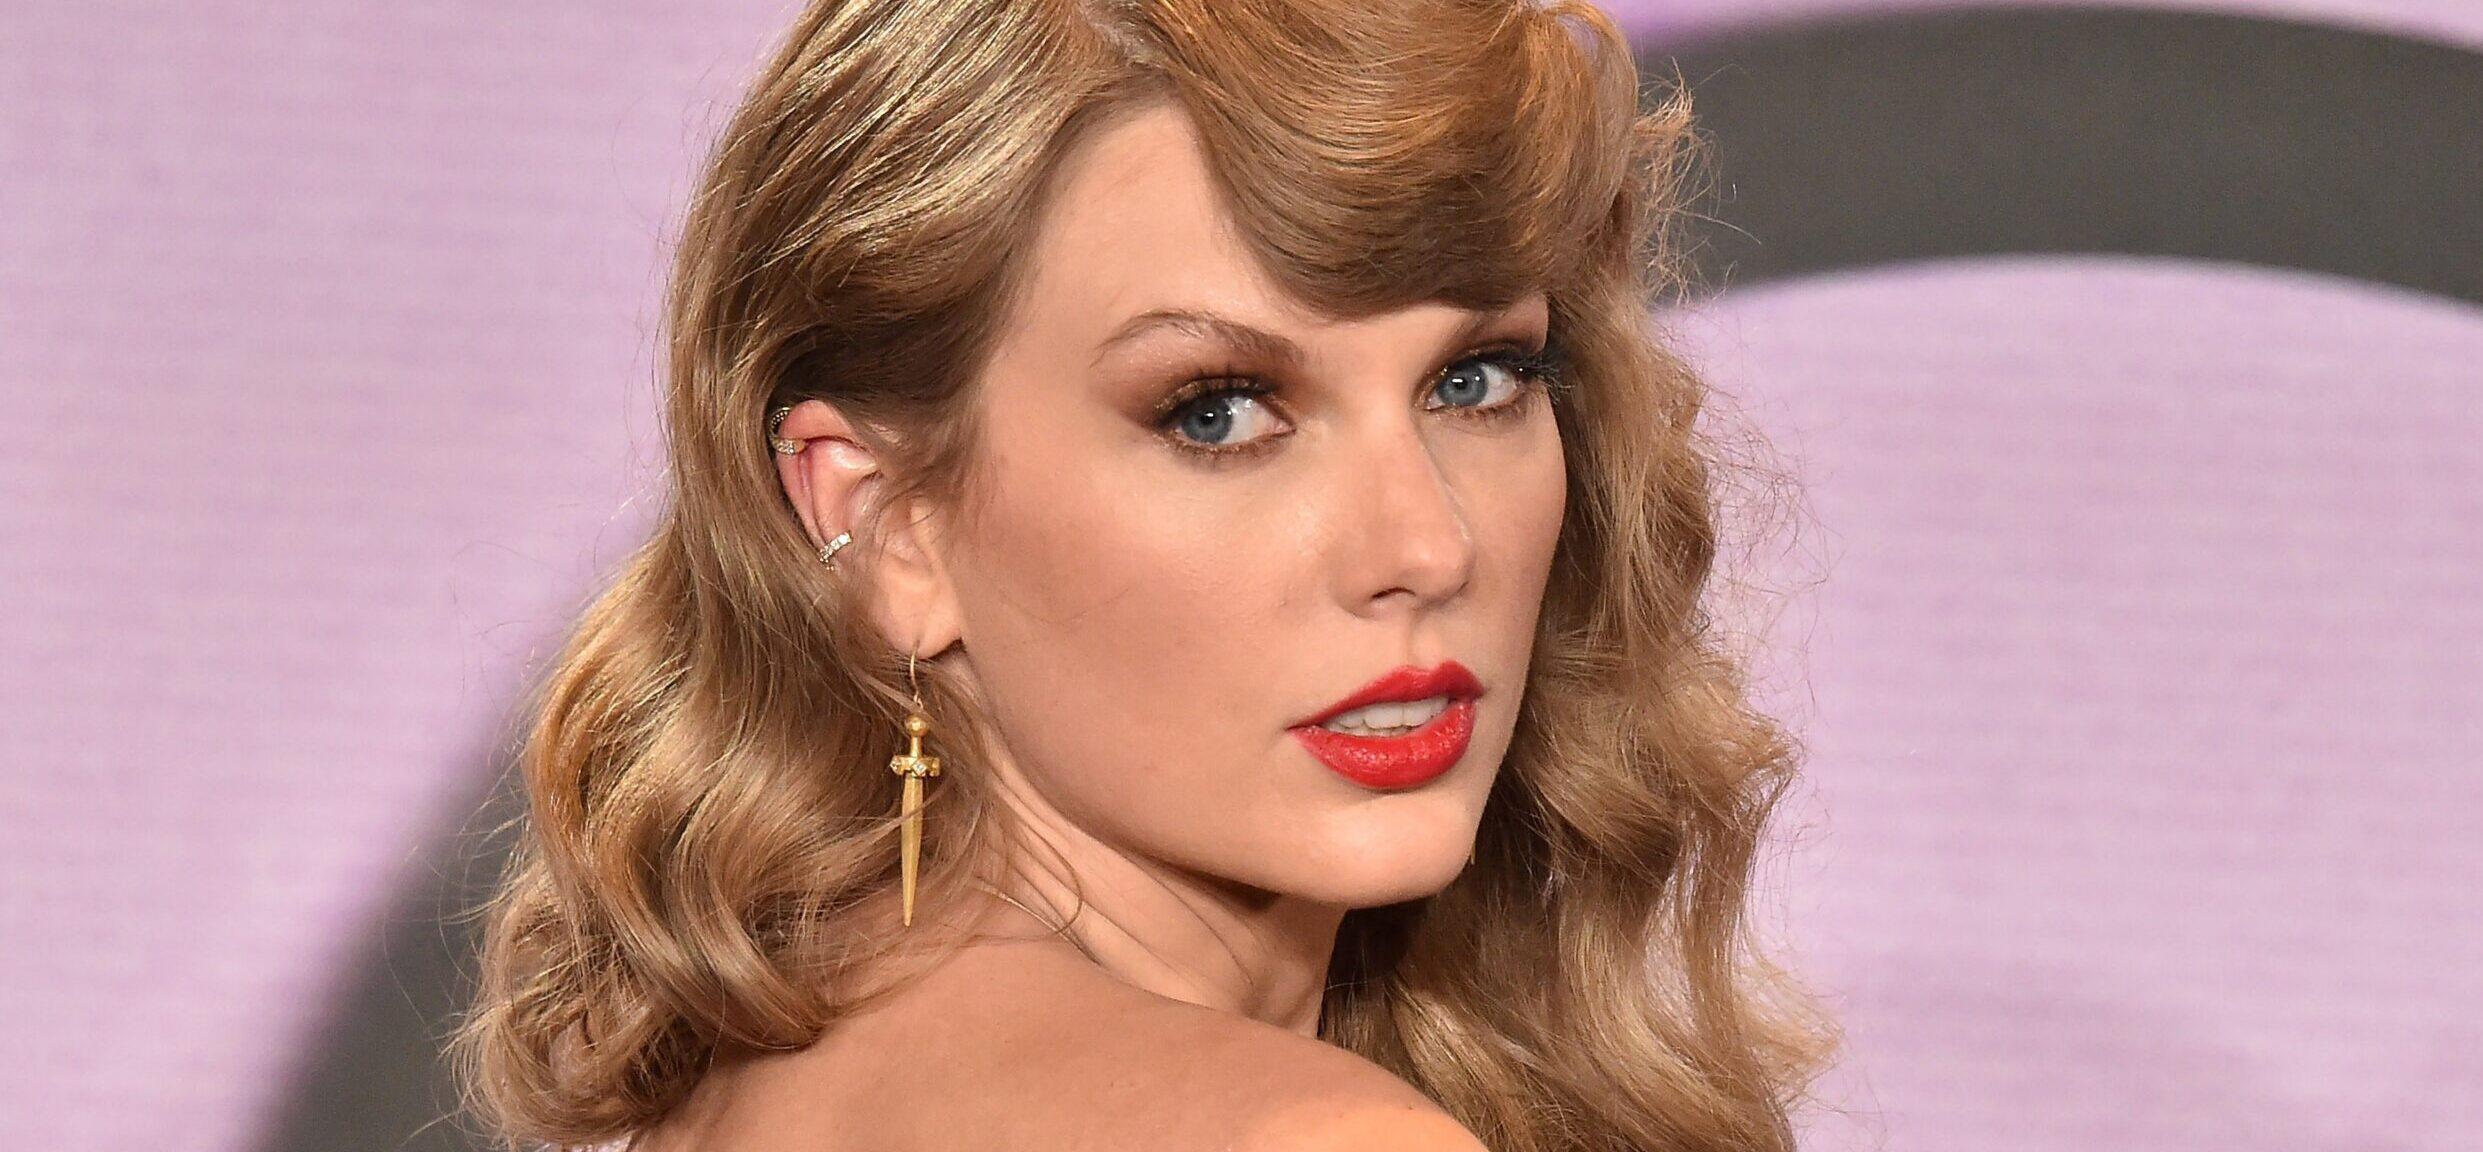 Taylor Swift in the pressroom at the 2022 American Music Awards held at the Microsoft Theatre on November 20, 2022